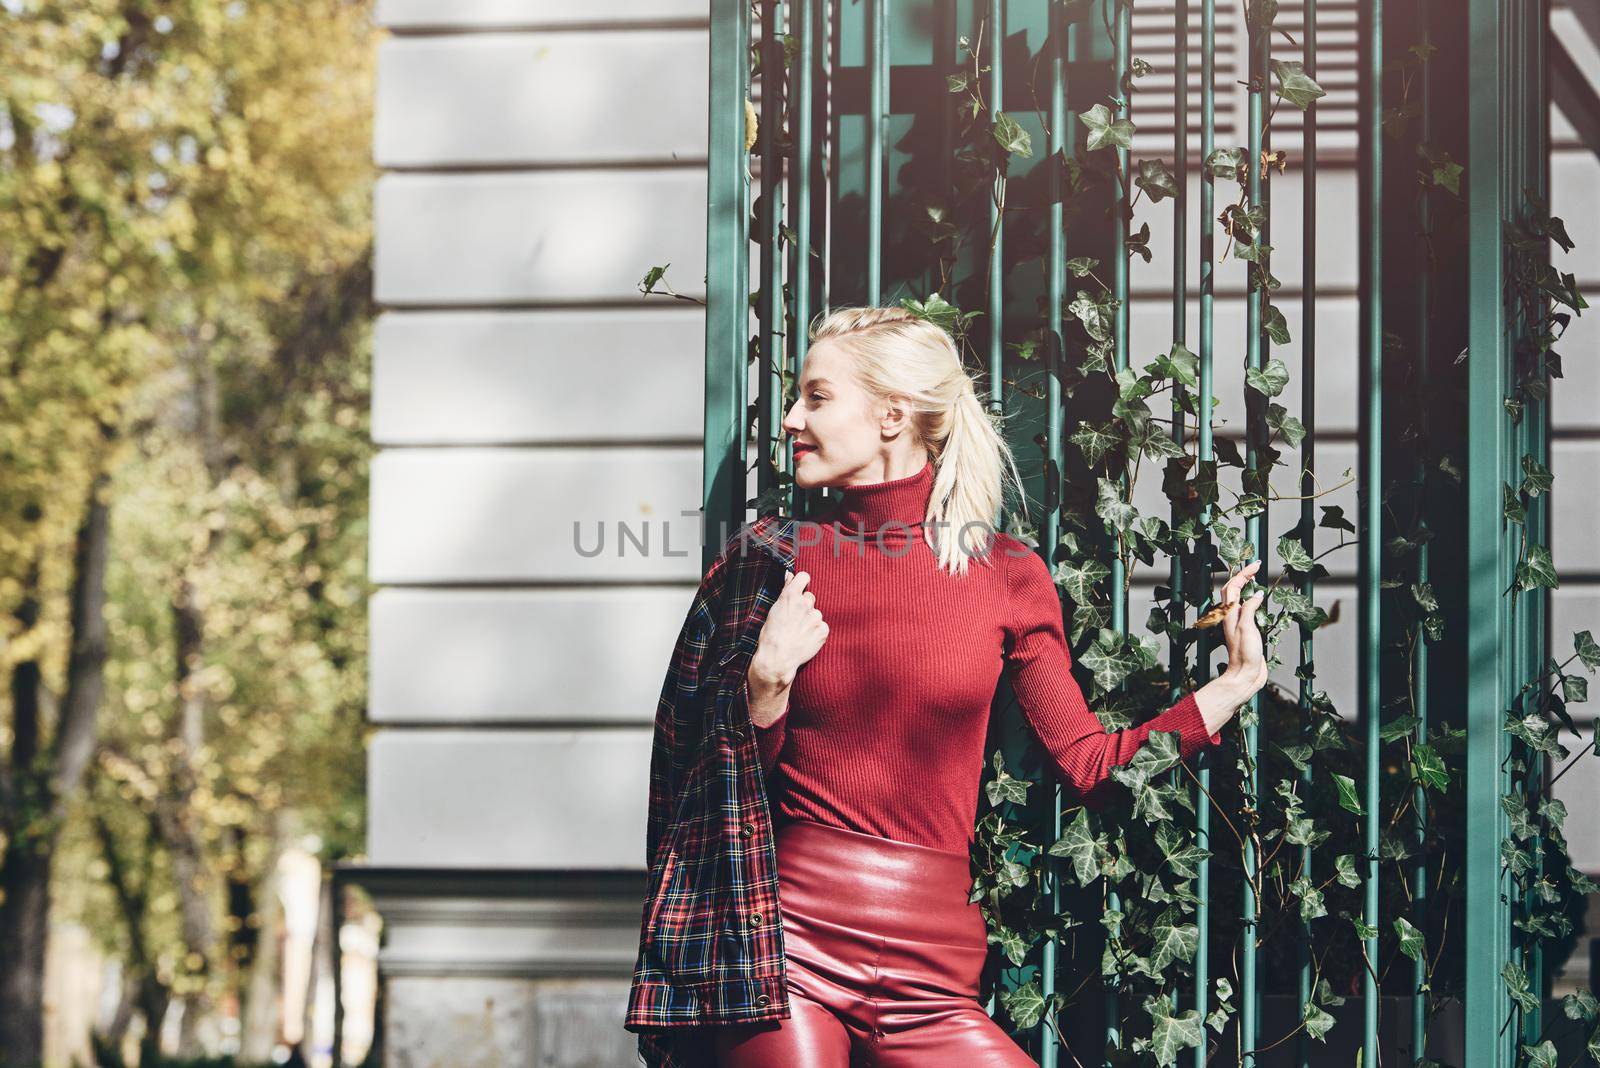 A beautiful, modern, fashionable blonde girl with a red lipstick posing outdoors . Dressed in a red leather leggings, turtleneck and checkered jacket.